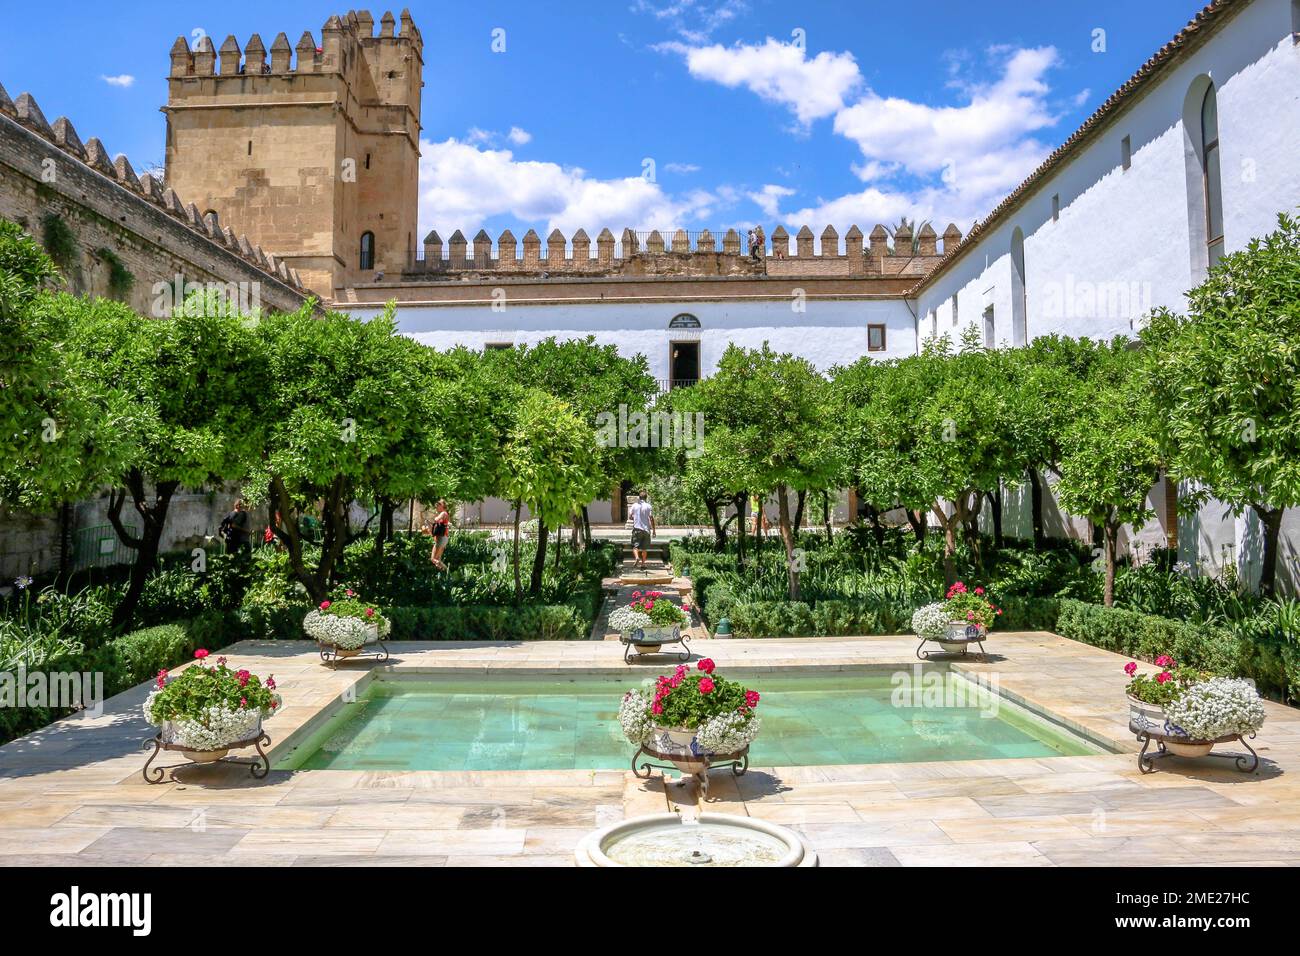 Views from Alcázar de los Reyes Cristianos, a palace in the city of Cordoba, Spain Stock Photo